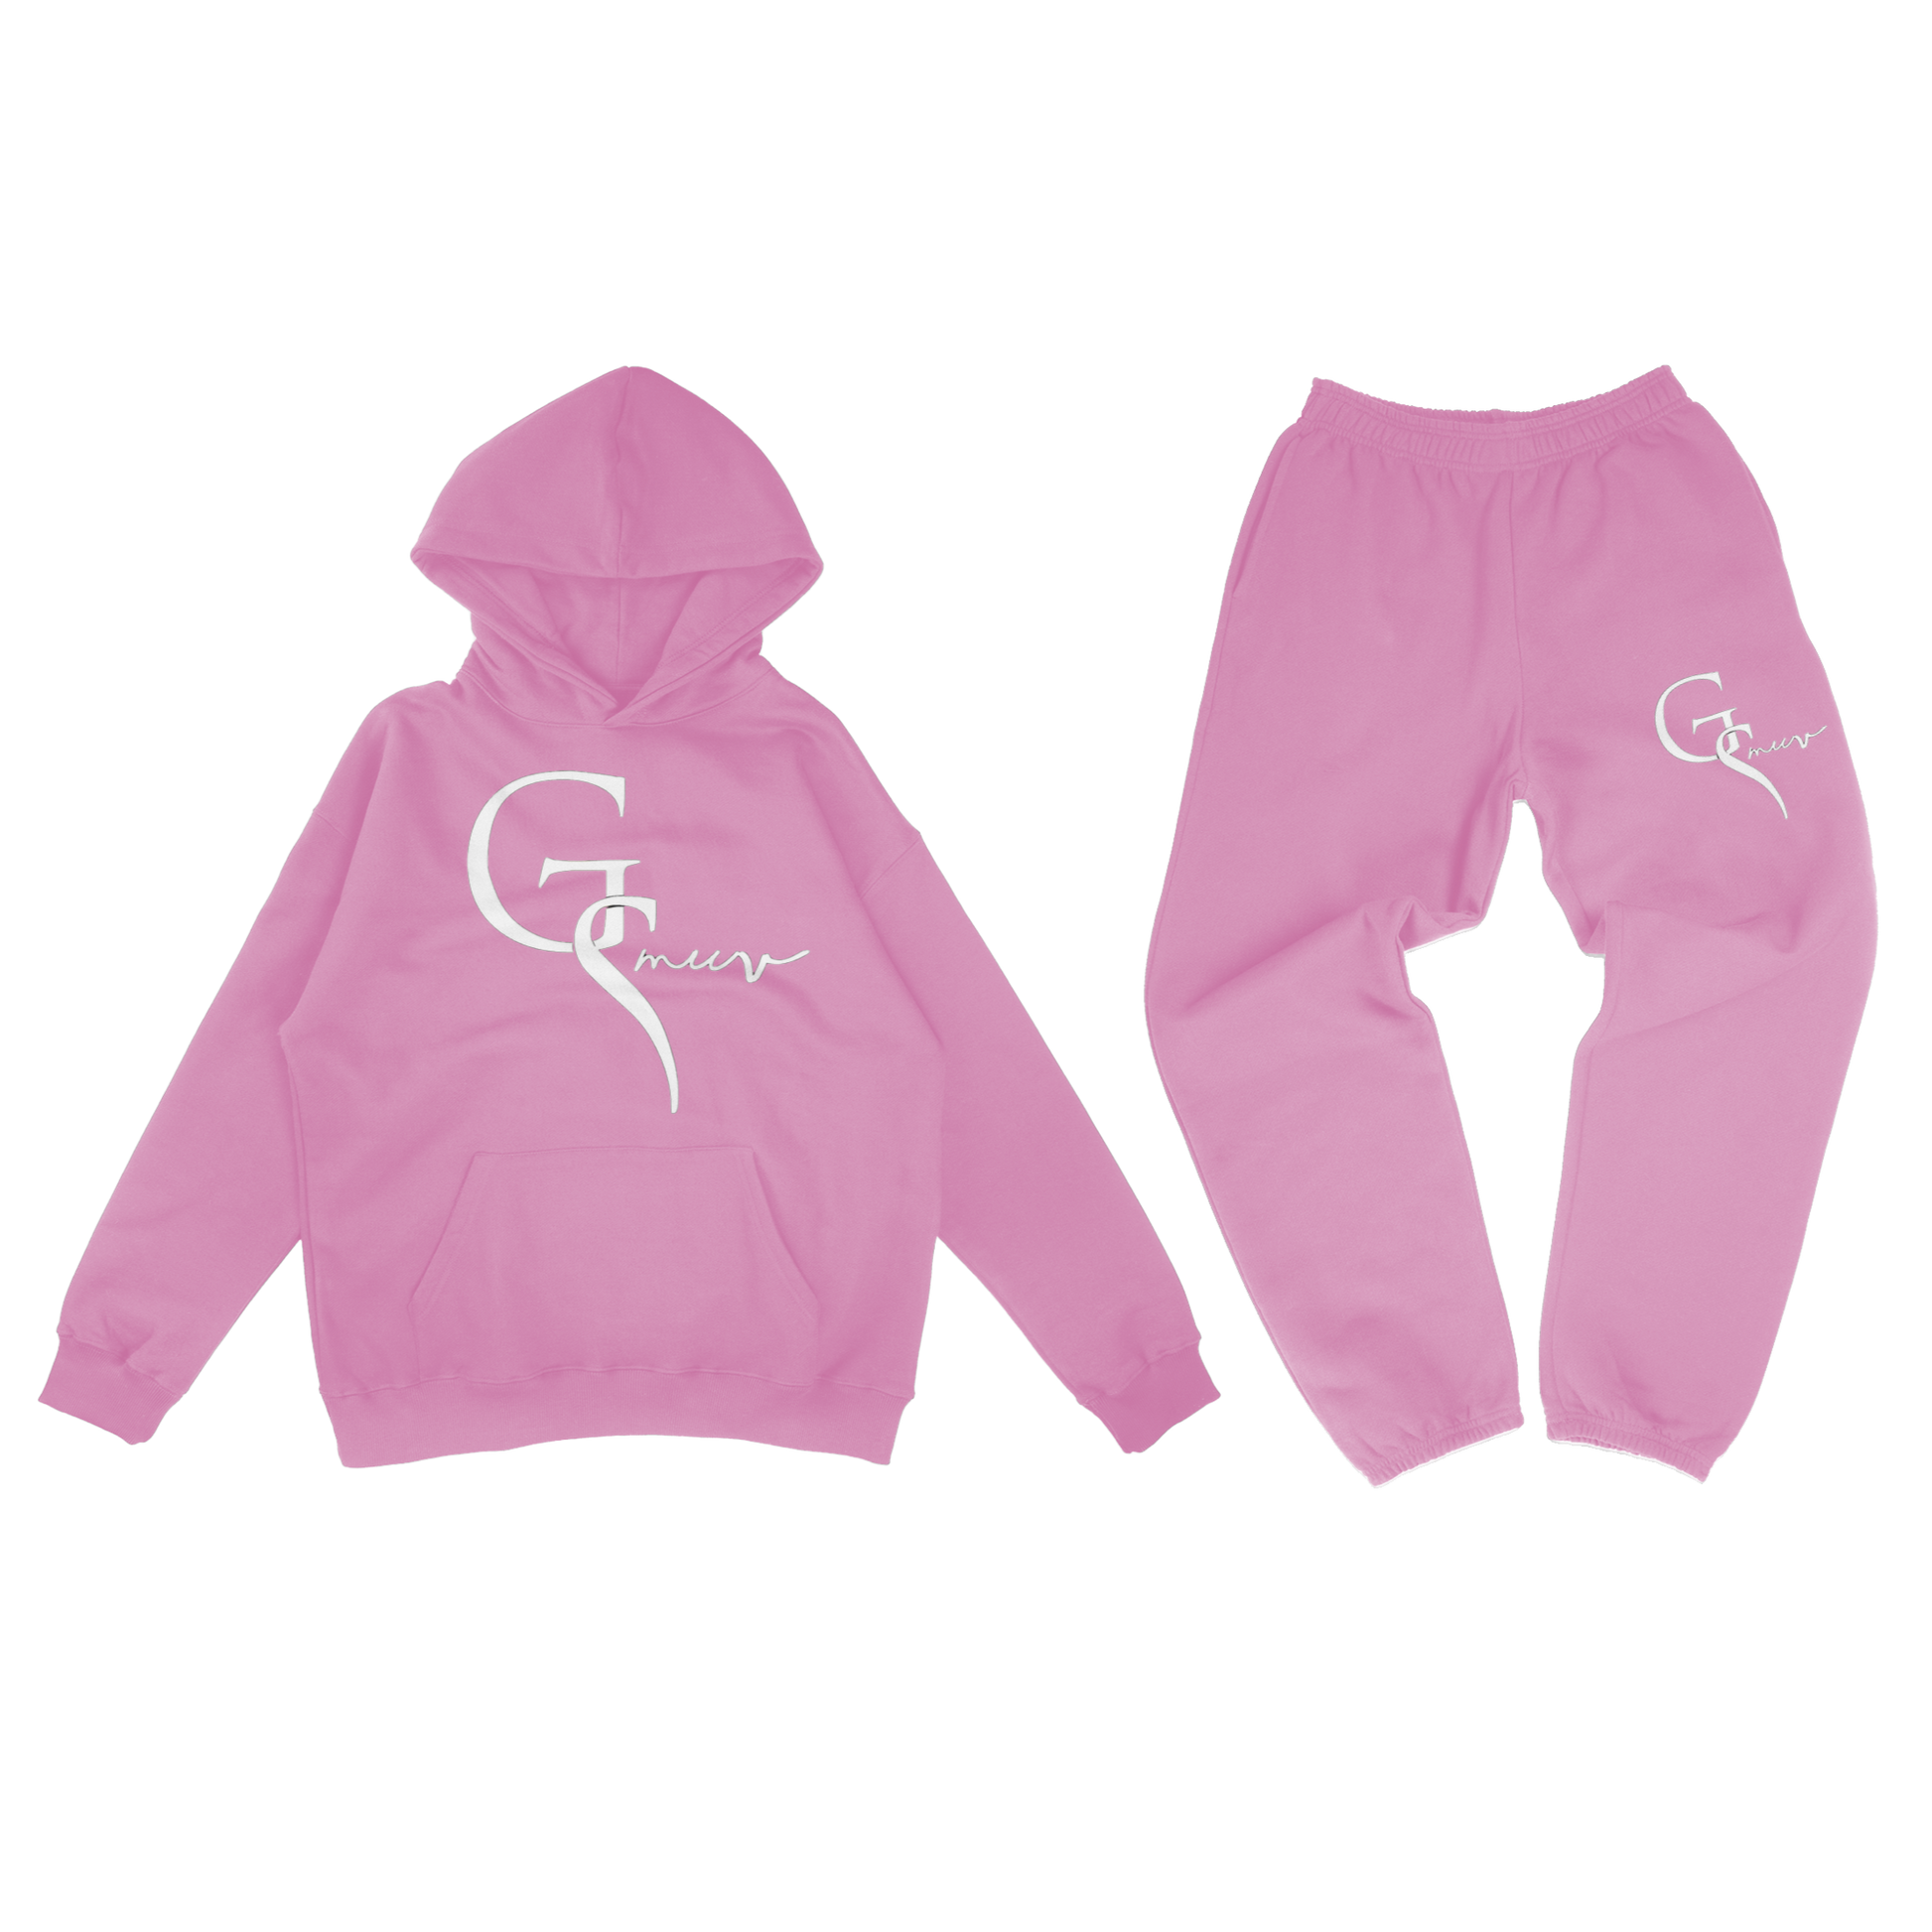 A pink hoodie top with a pink bottom jogger set with white GSMUV logo embed on both items of clothing with transparent background